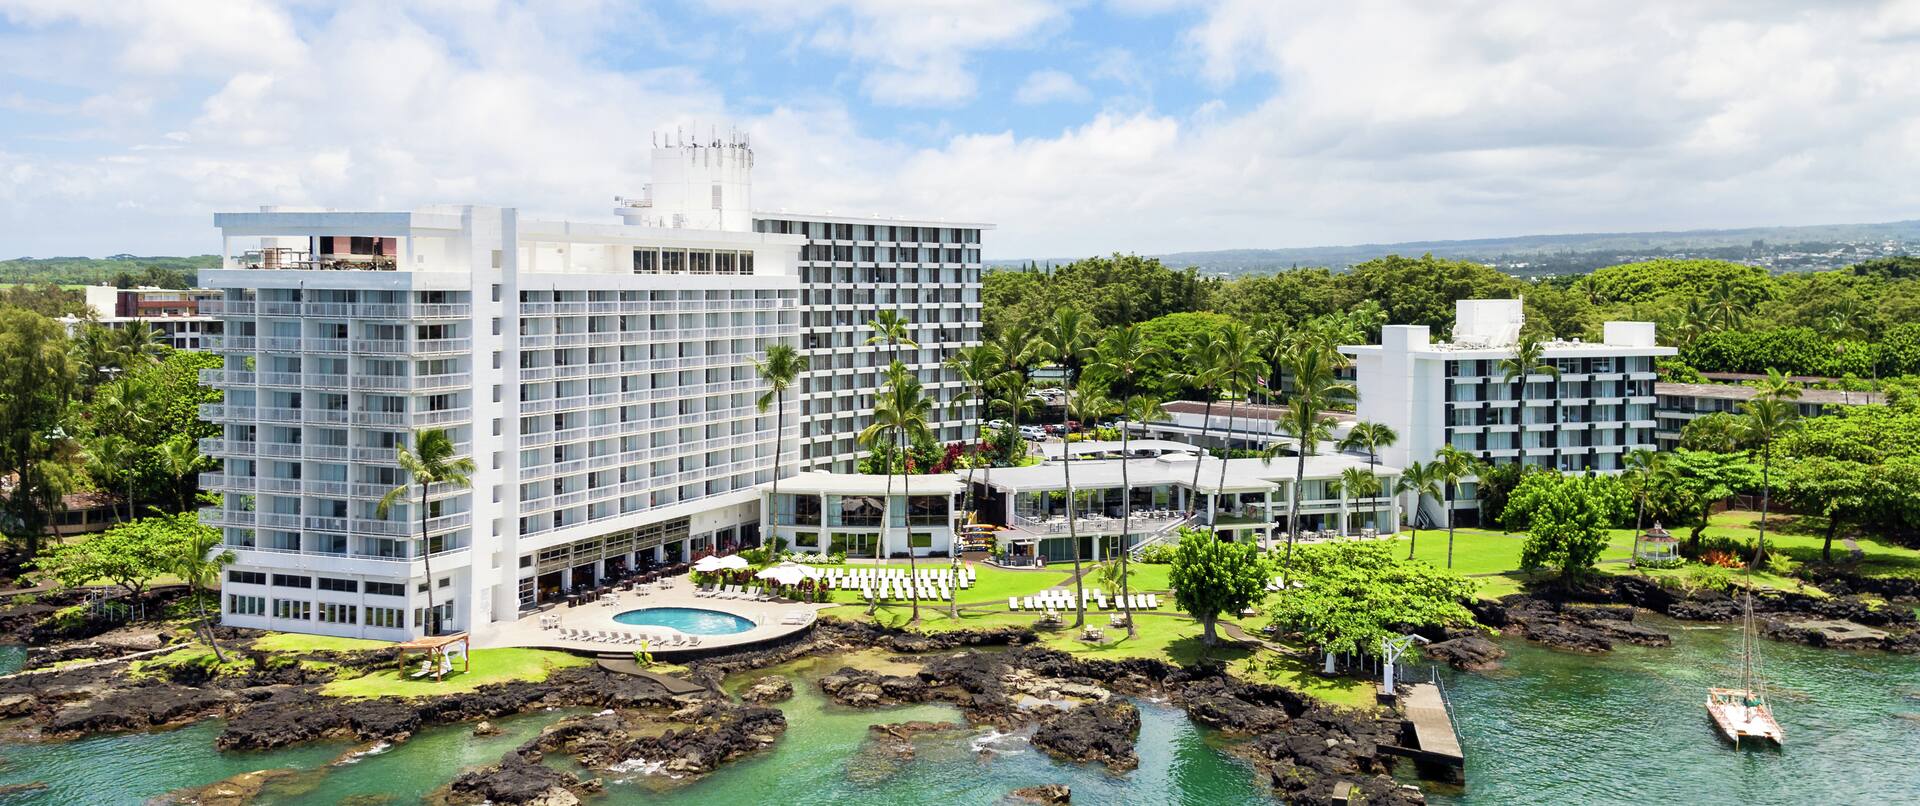 Enjoy ocean views from our Hilo Hotel.